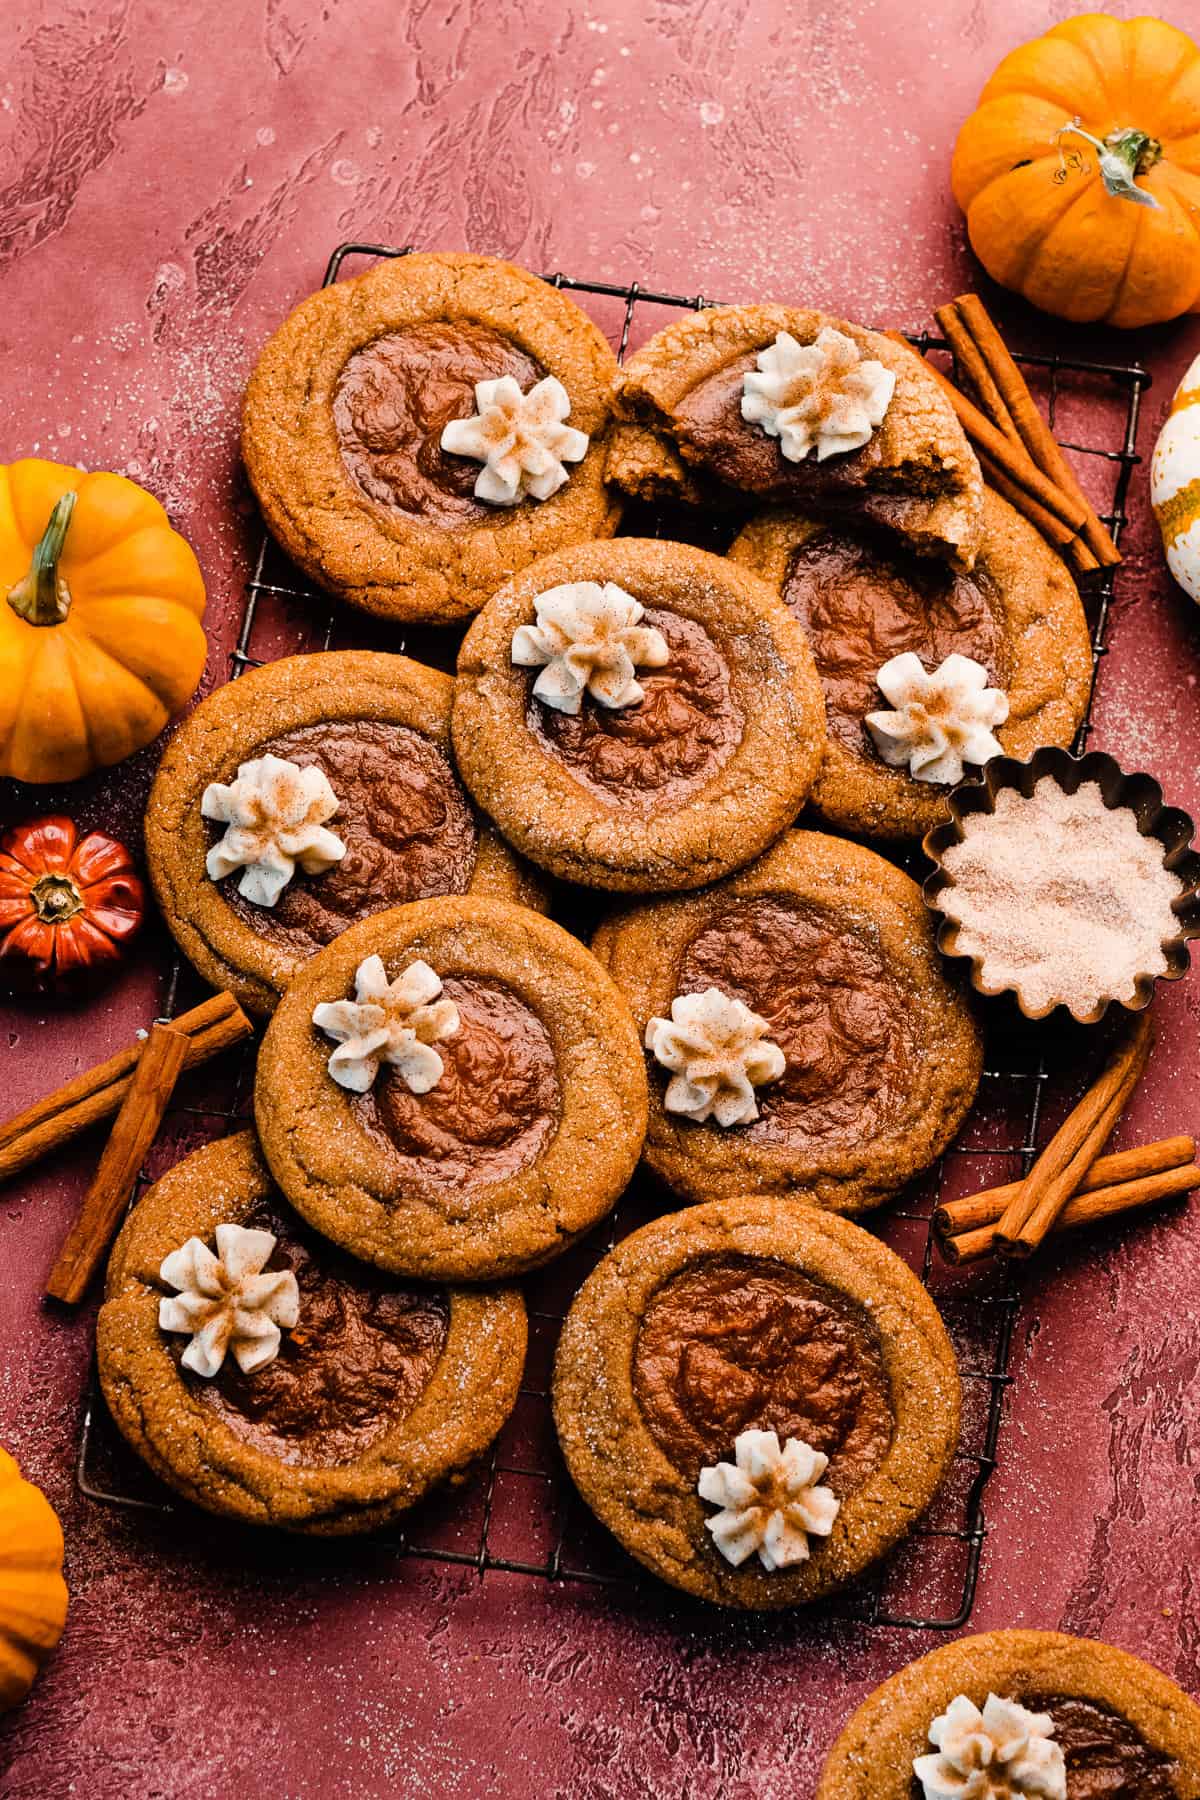 Pumpkin Spice Products That Are Taking Things Next Level